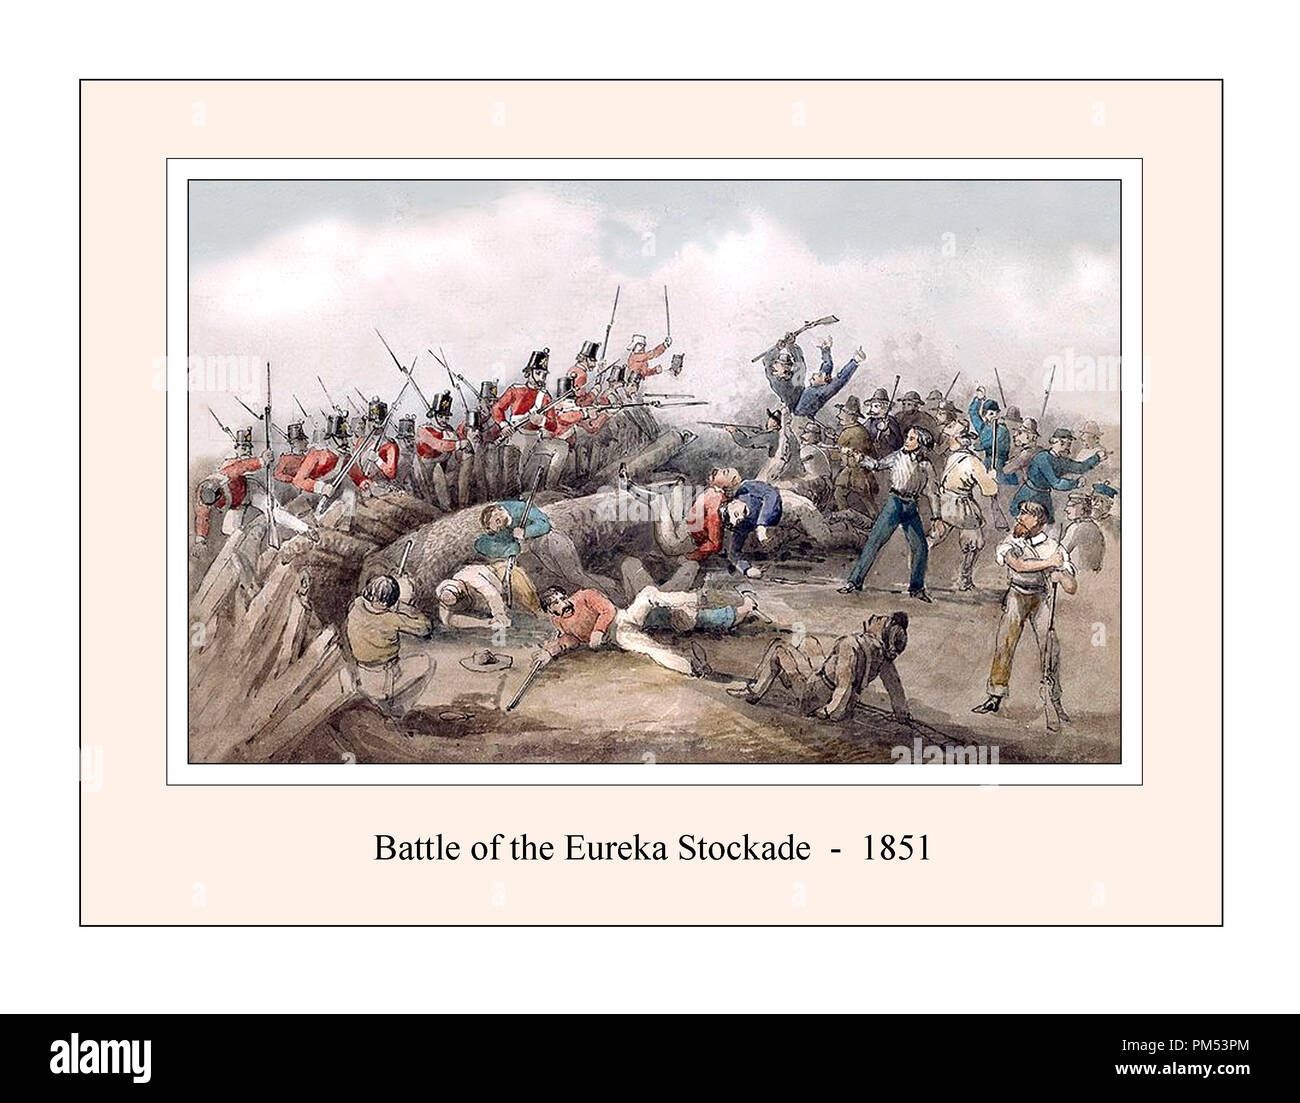 Battle of Eureka Stockade 1851 by J.B.Henderson. Reset and Refreshed Stock Photo